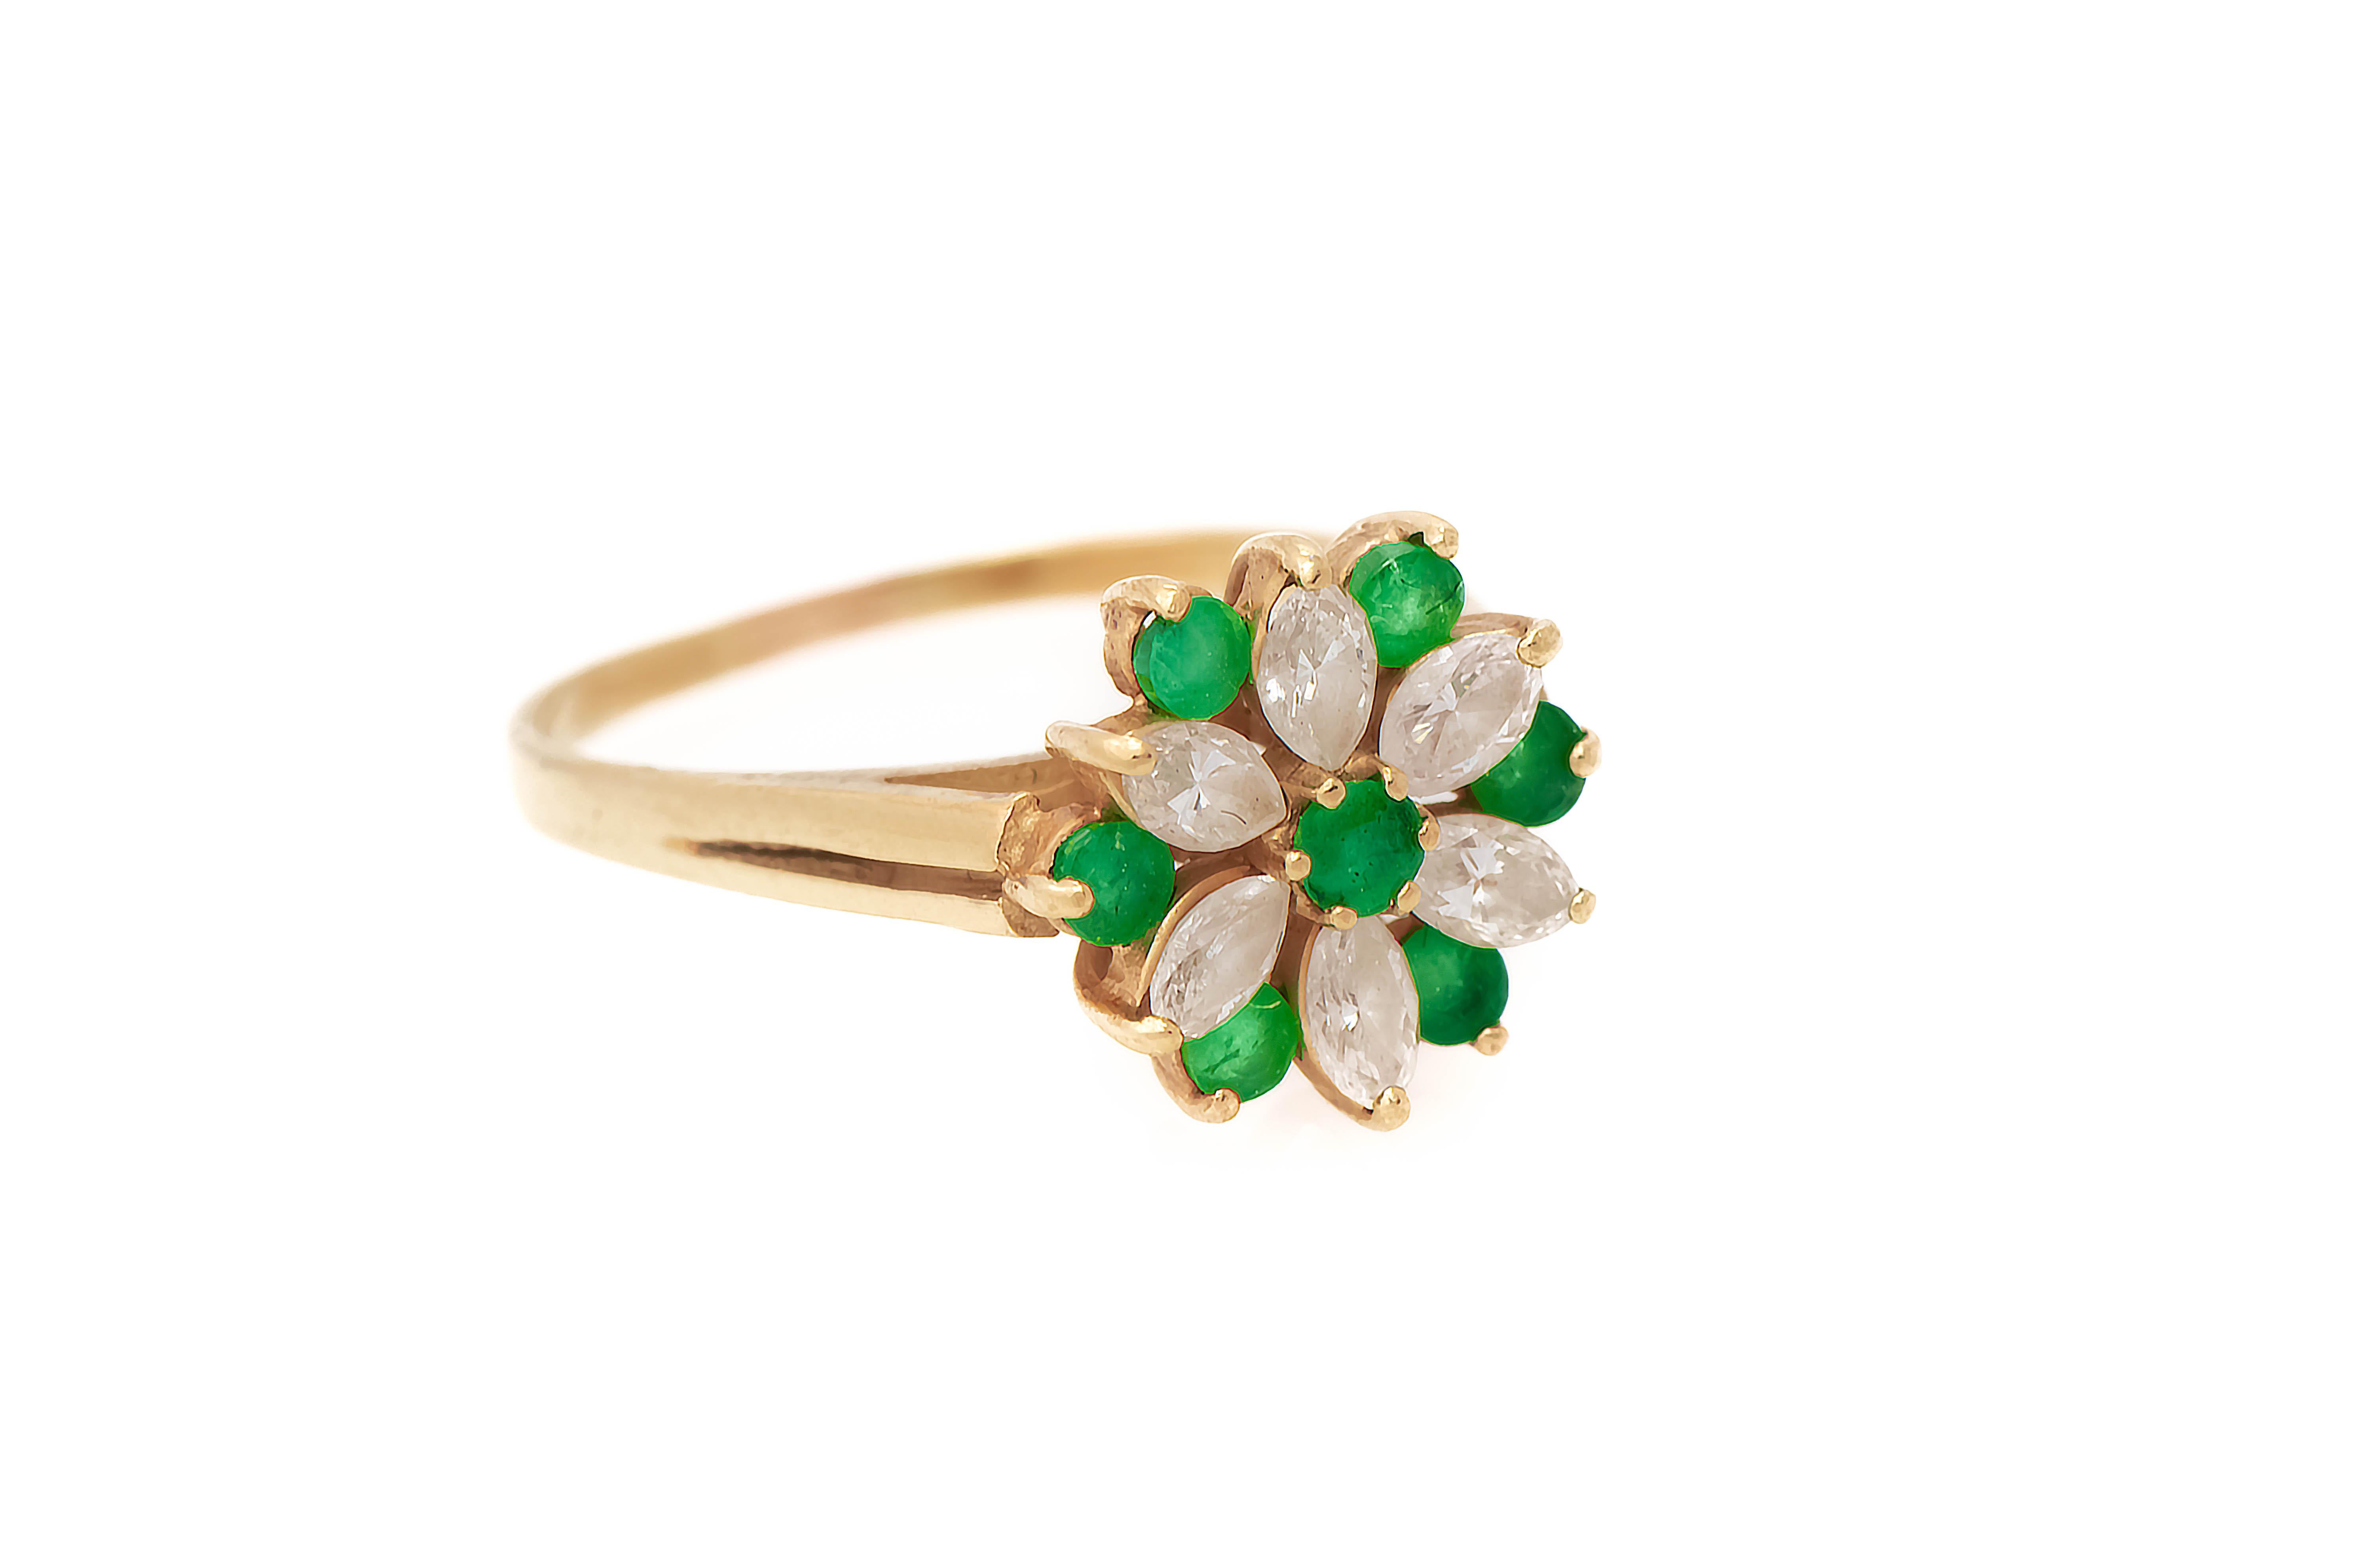 Diamond & Emerald Flower Cocktail Ring 

1 round cut emerald surrounded by 6 marquise cut diamonds & 6 round cut emeralds in a flower motif.

Ring Size: 7.25

Resizable free of charge

Metal Type: 14k yellow gold 